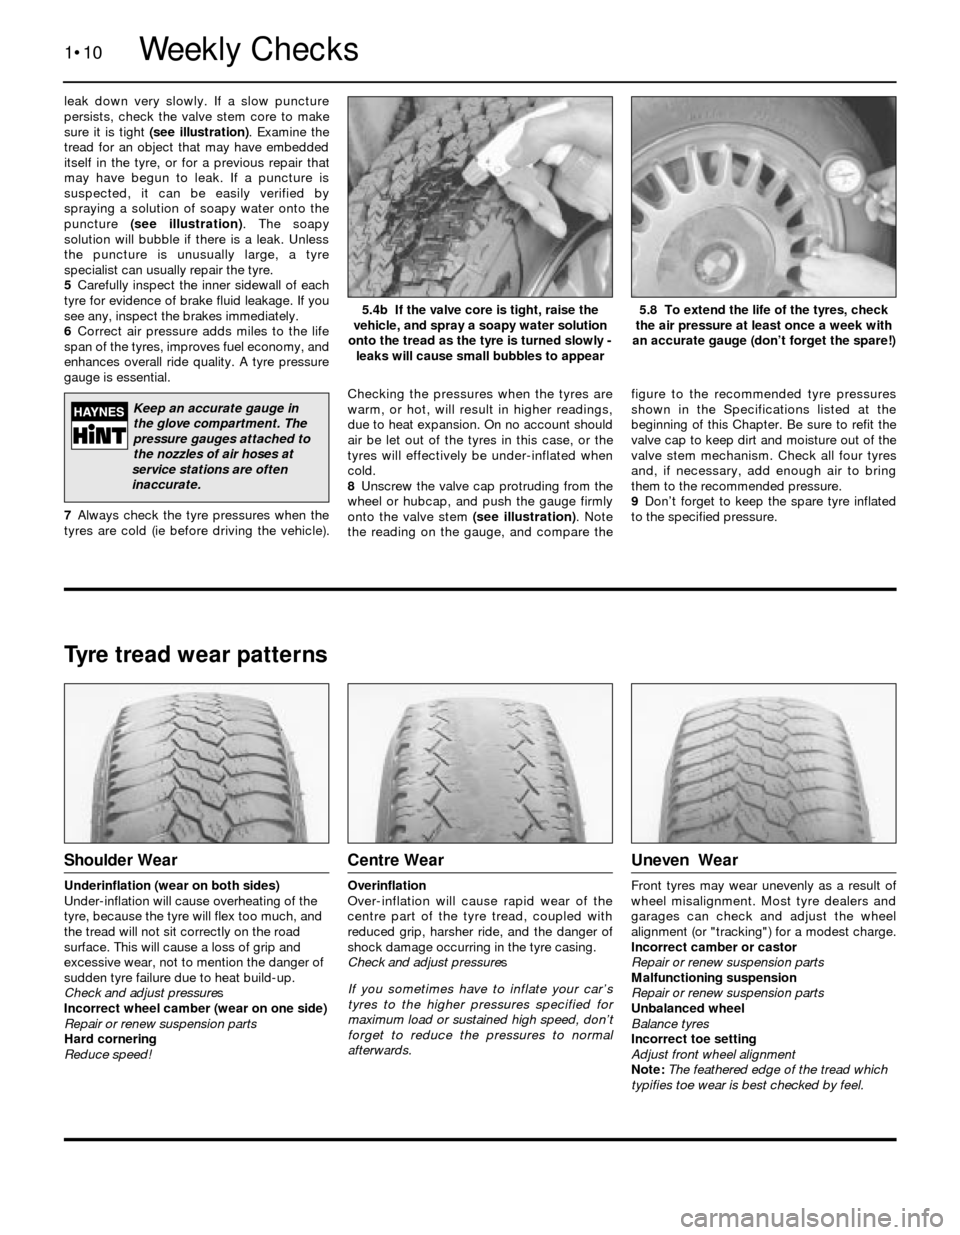 BMW 3 SERIES 1985 E30 Workshop Manual leak down very slowly. If a slow puncture
persists, check the valve stem core to make
sure it is tight (see illustration). Examine the
tread for an object that may have embedded
itself in the tyre, or